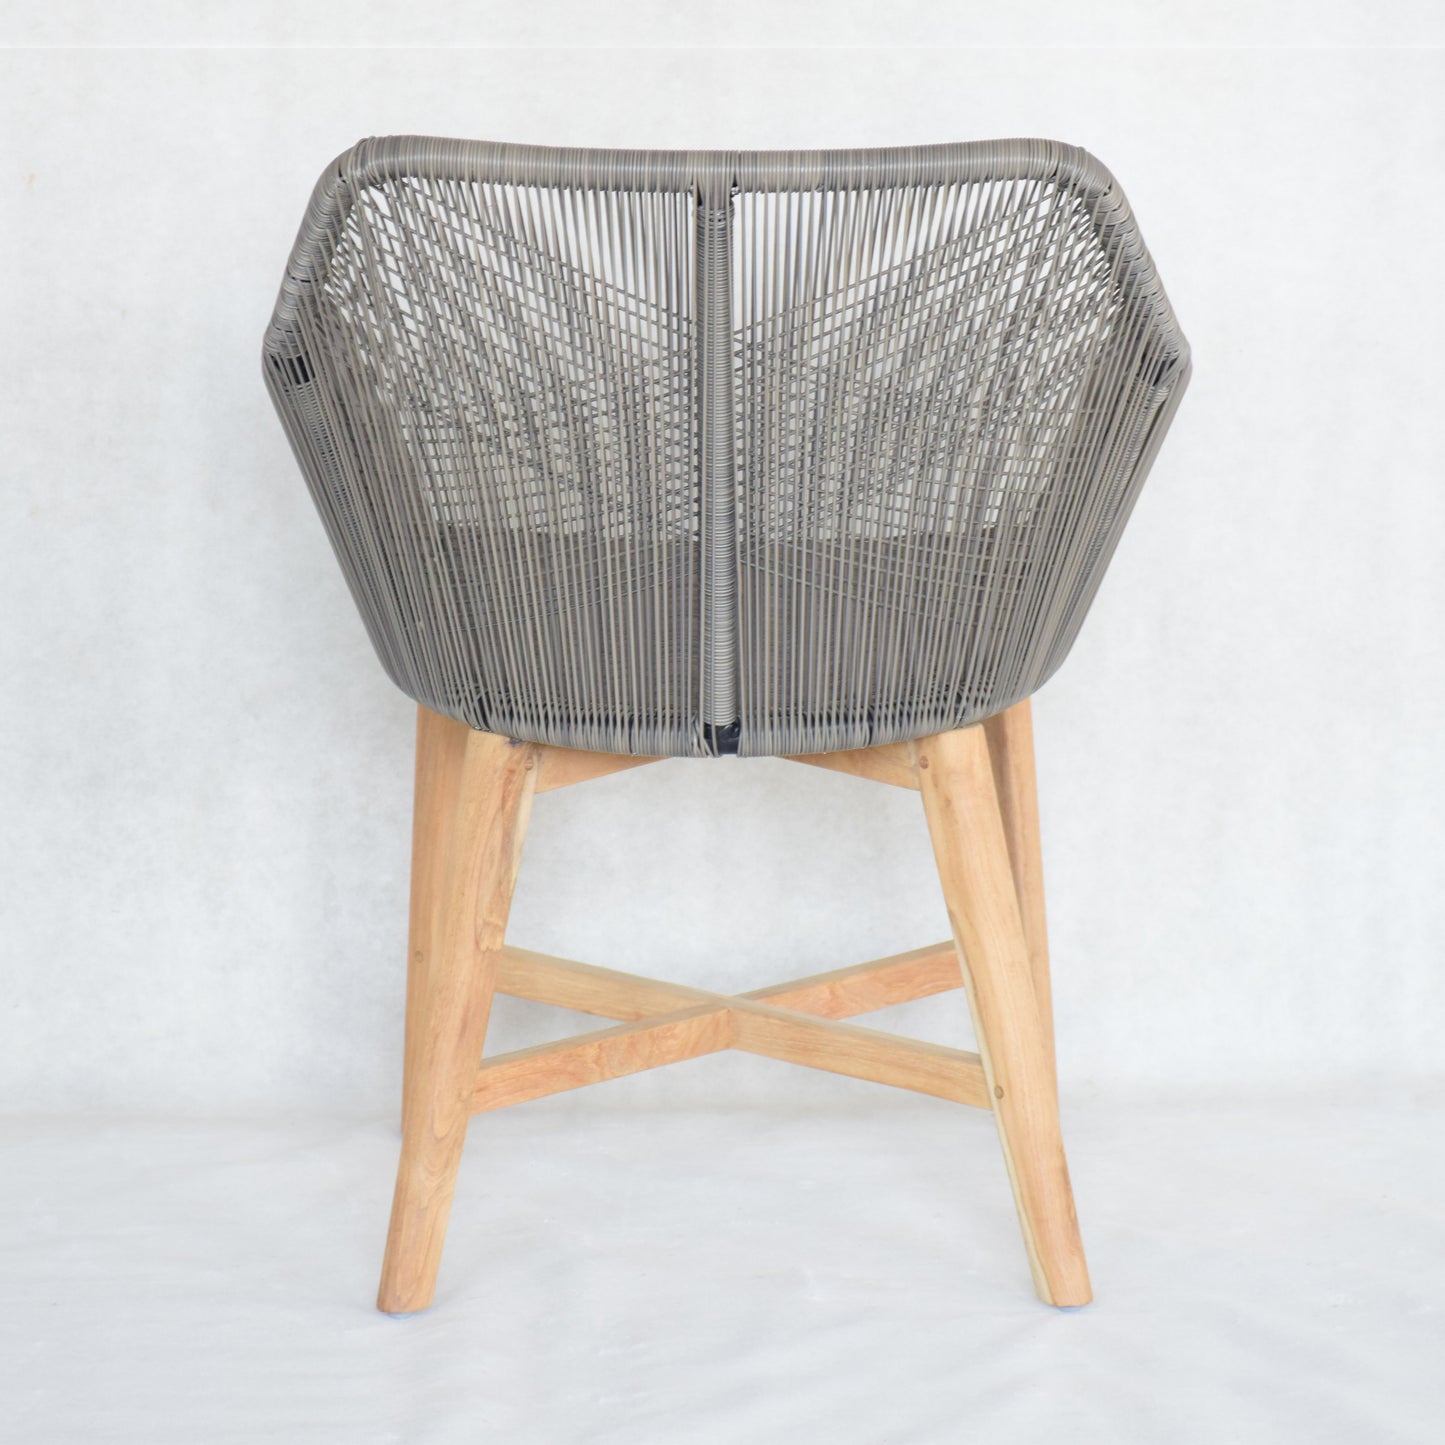 Tiri Outdoor Teak and Rope Dining Chair - COMING SOON, Enquire for more details